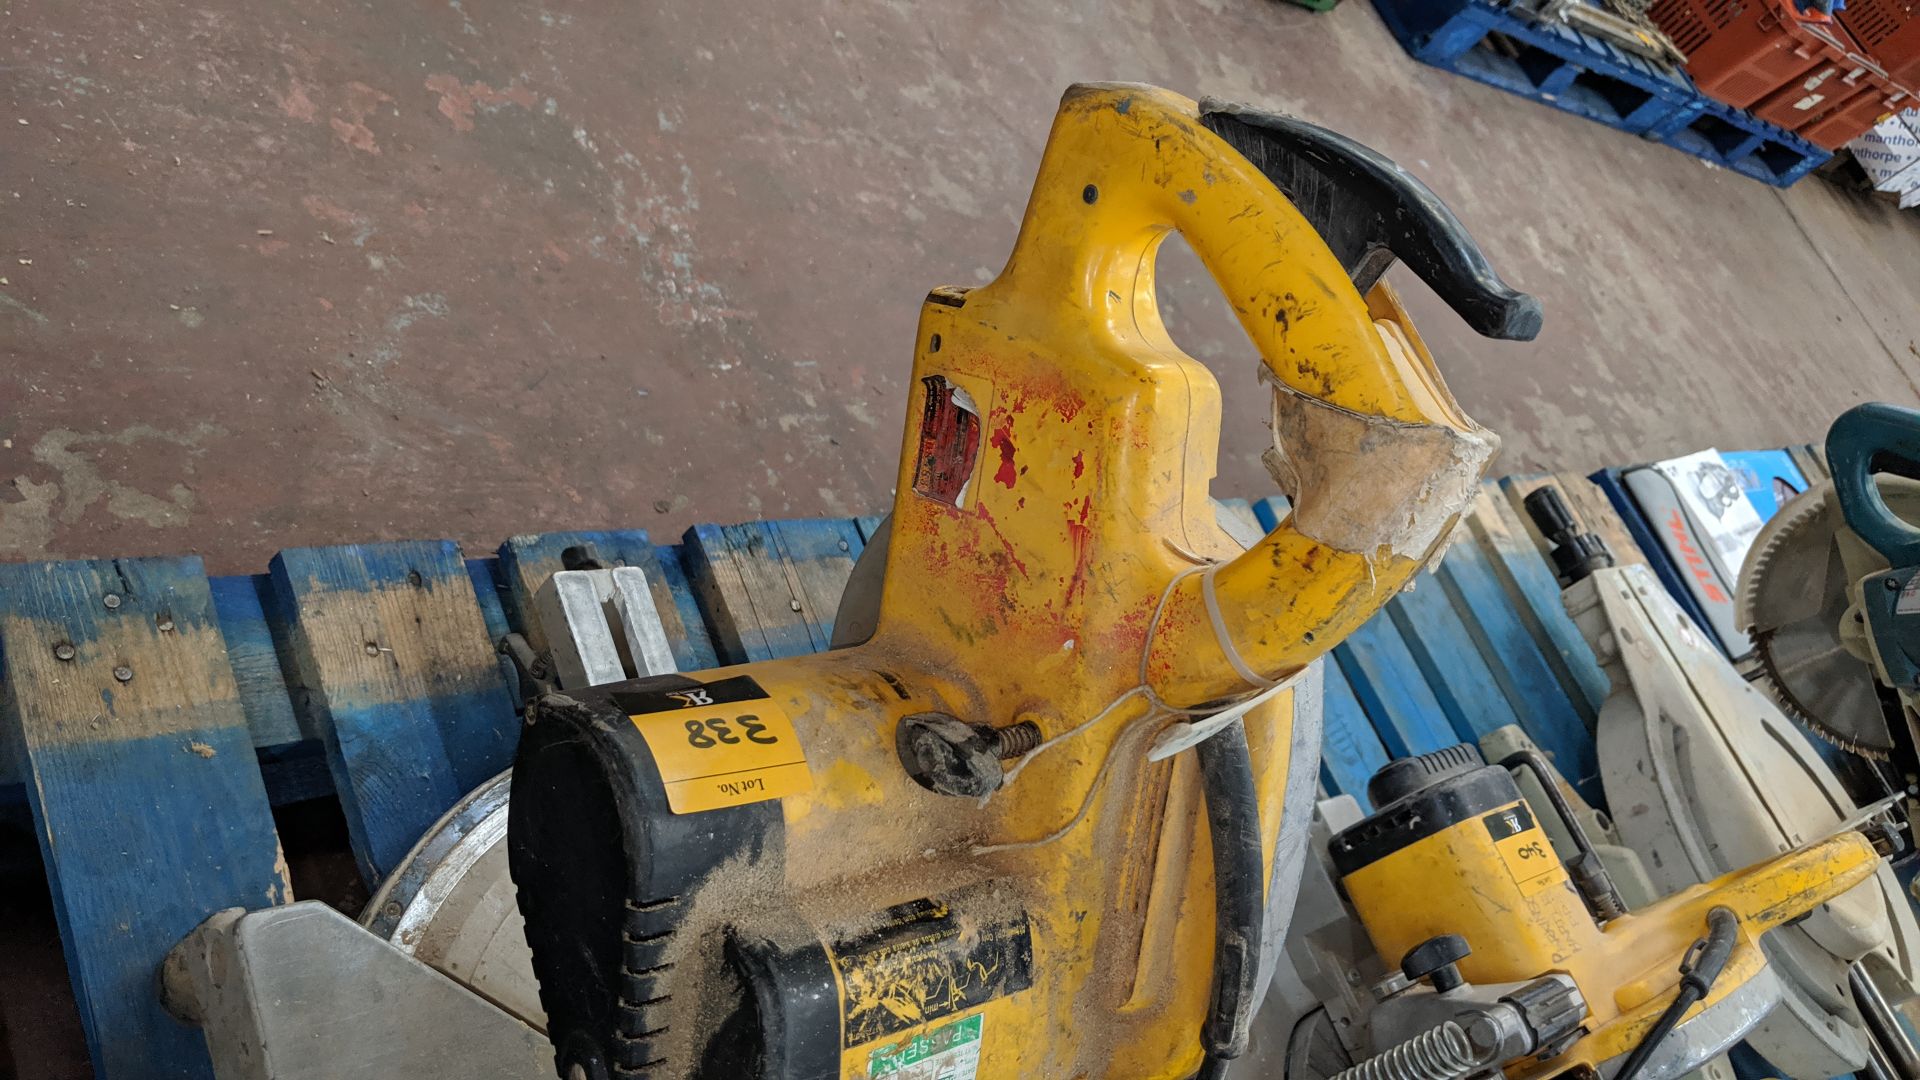 DeWalt 110V mitre saw IMPORTANT: Please remember goods successfully bid upon must be paid for and - Image 4 of 5